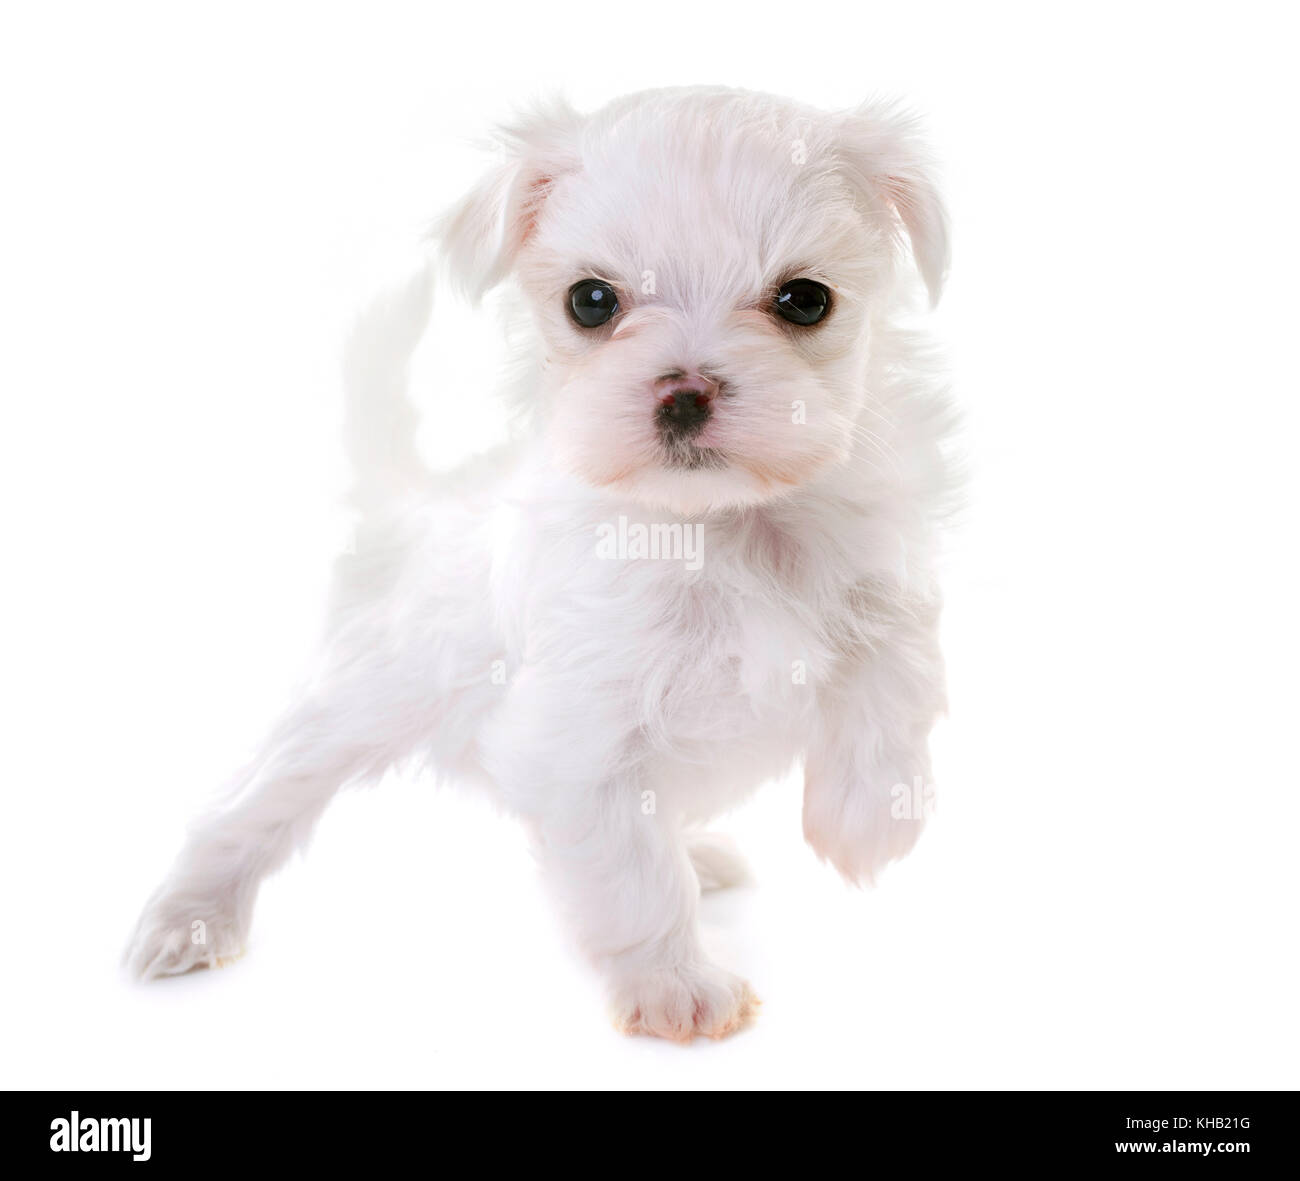 Chiot maltese dog in front of white background Banque D'Images